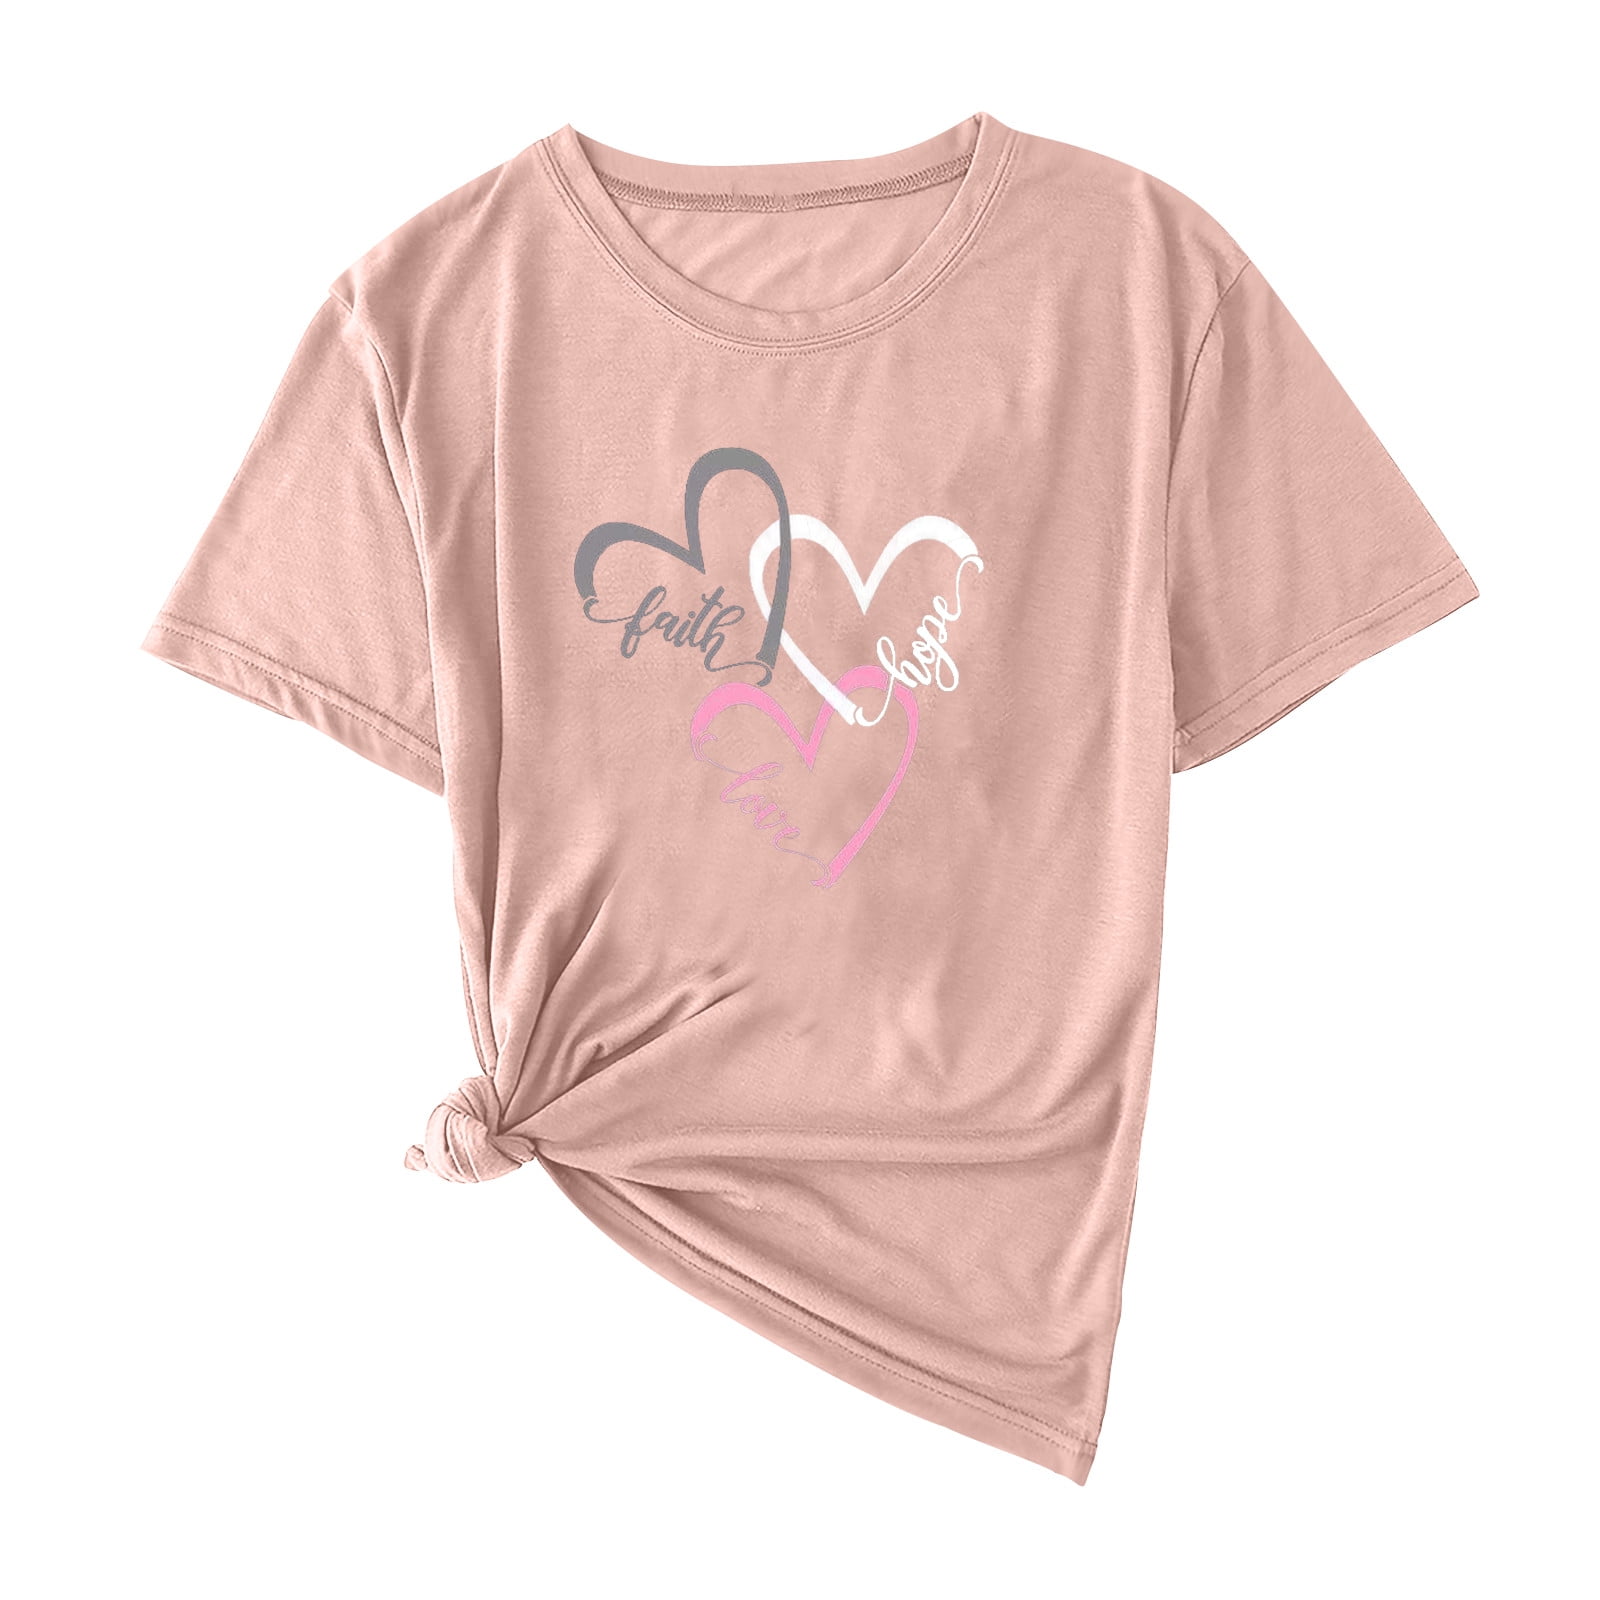 M Girl's/Women's Fruit of Loom Pink Valentine T-Shirt S L and XL 